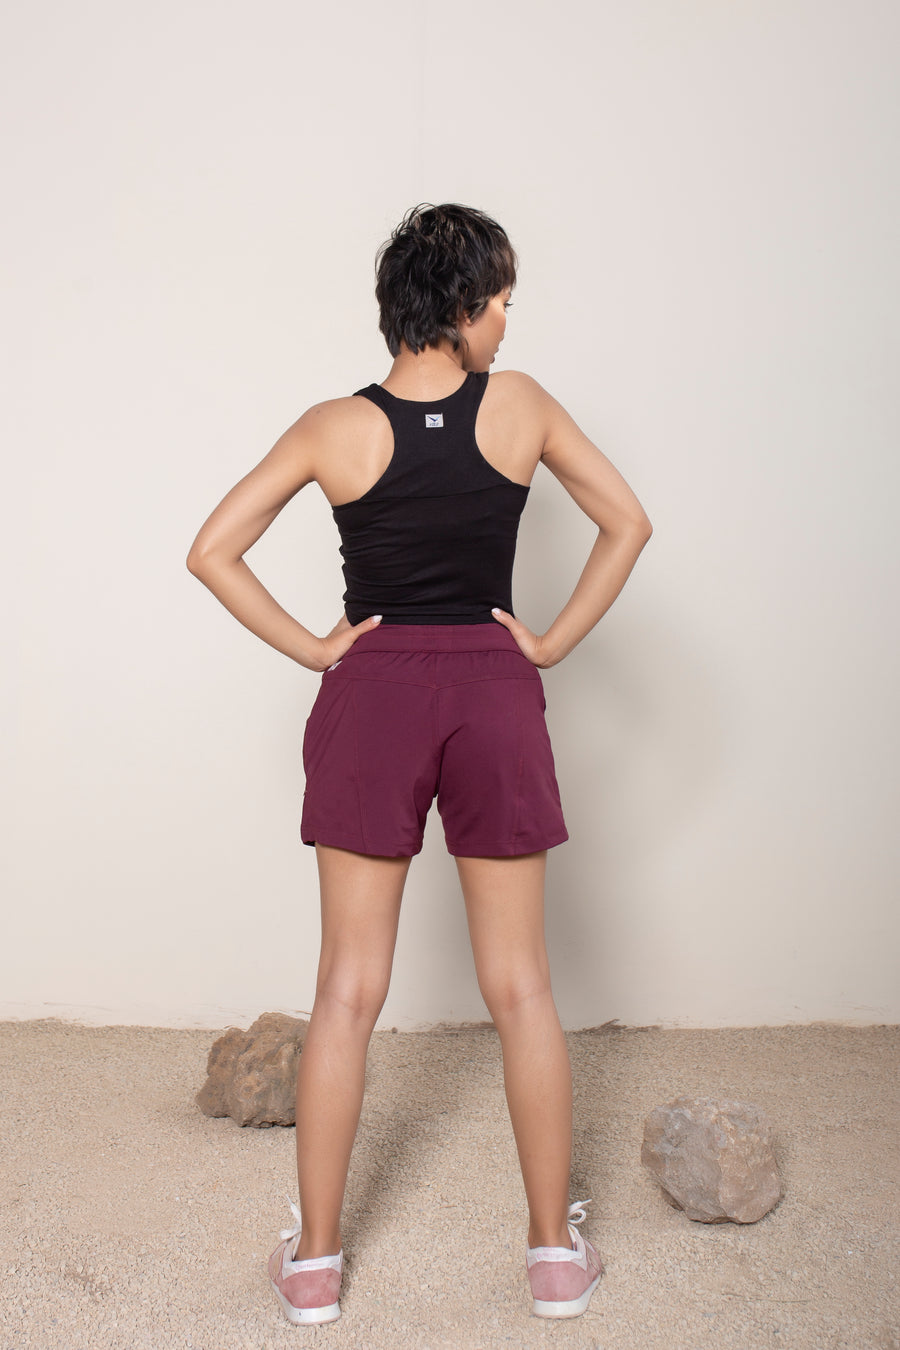 Women's Terra Shorts Burgundy | VOLO Apparel | A blend of technology, function, and style. The Terra shorts are designed and ready for every active opportunity that comes your way. Your first women's shorts with deep pockets, a snap button smart phone pocket, a zippered key pocket, and a hidden zippered back pocket.  High waisted, great for climbing, yoga, training, running and chilling.